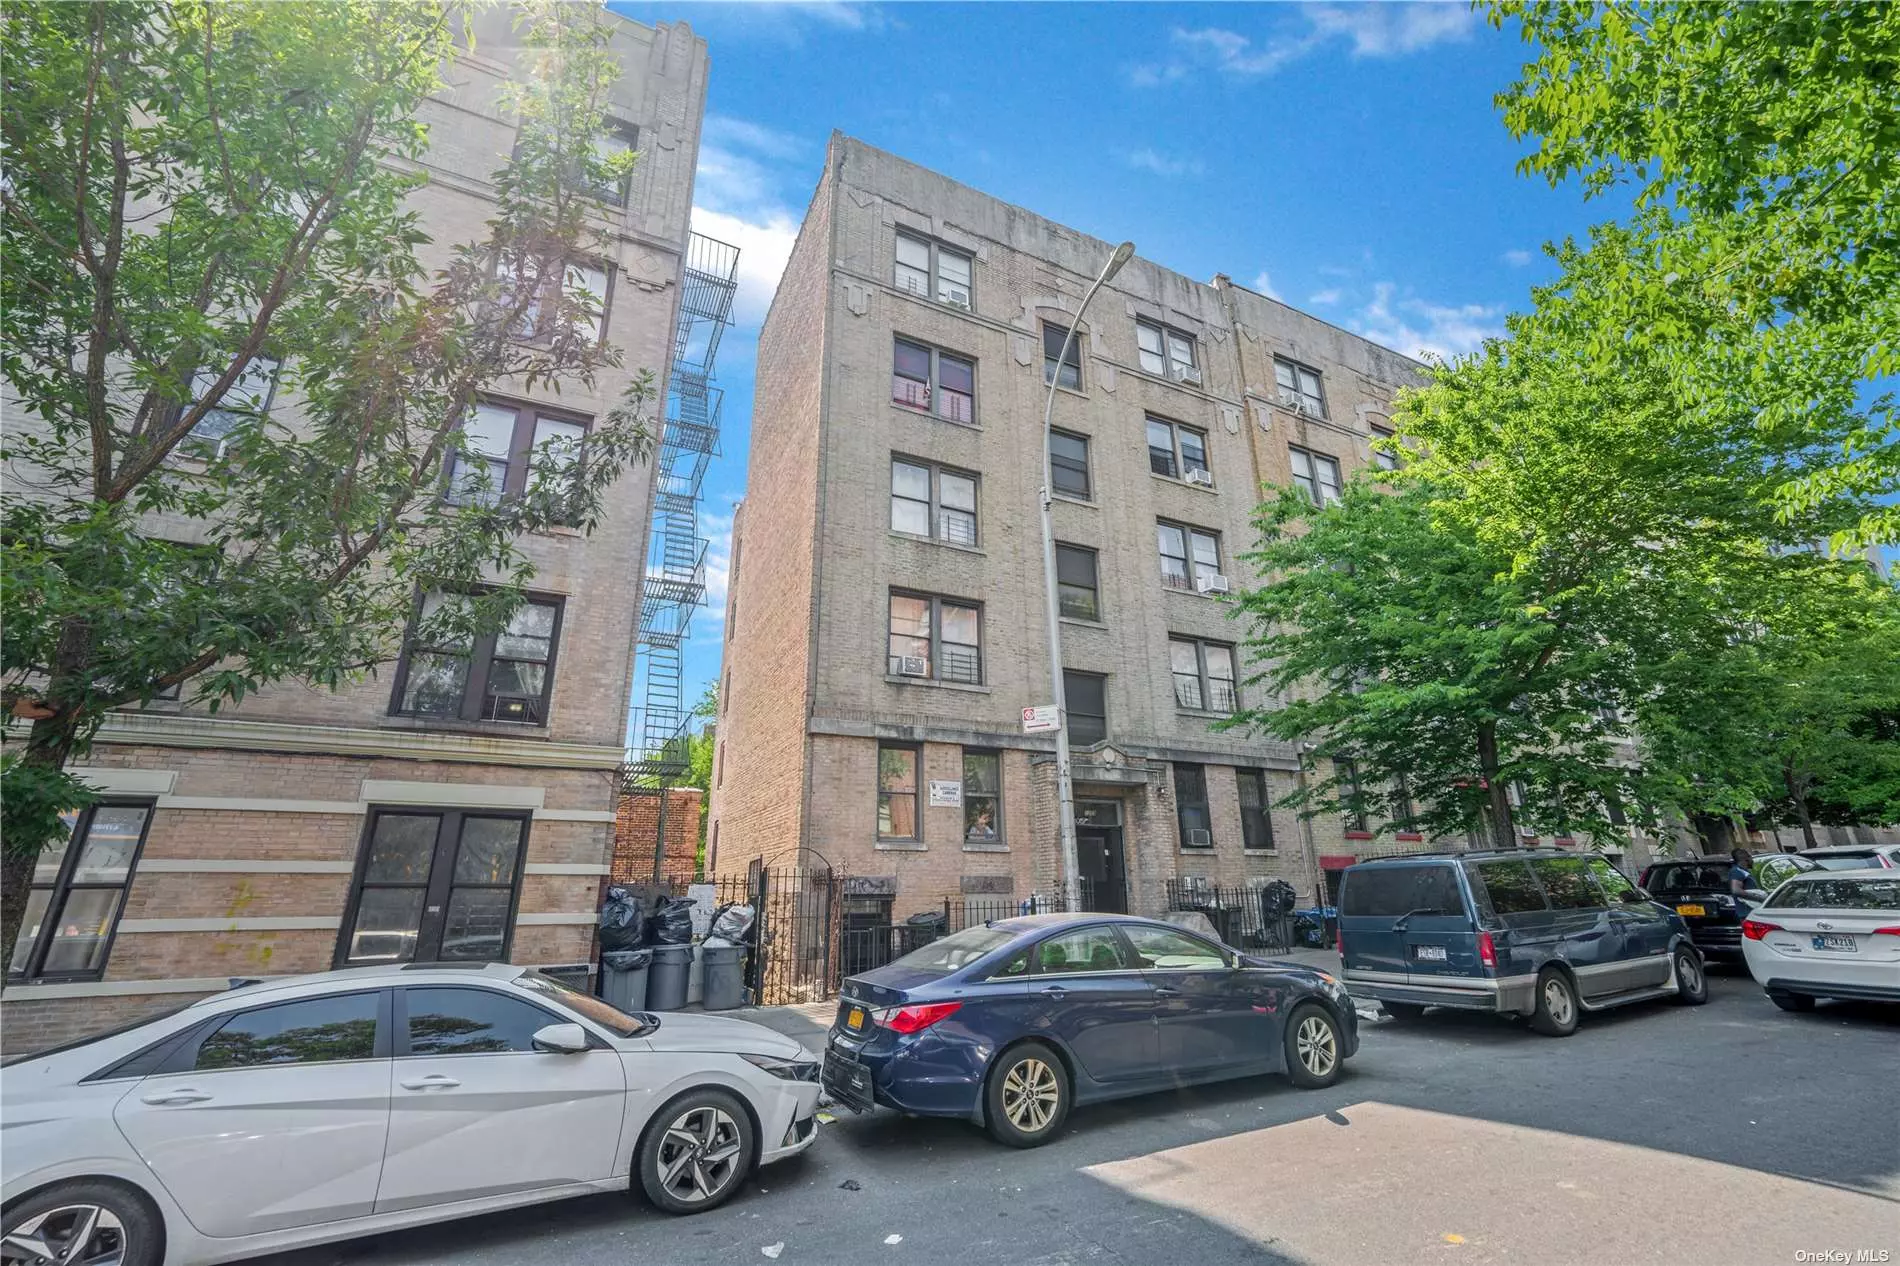 ***Seller is accepting to creative financing options (Seller financing) Don&rsquo;t miss your chance to acquire this 11-unit plus package deal (two buildings1209 +1215 Elder Ave total of 22 units 6.5mil together) 1215 building over next.**** Value-add building in the Bronx, an area teeming with opportunity. Secure your stake in the New York City real estate market and reap the rewards of this strategically located property. Act now and seize this exciting investment prospect in one of the most dynamic neighborhoods in the Bronx! Each of the building offers a spacious layout featuring 3bd & 1bth, providing about 1100sq ample space for comfortable living. The well-designed floor plans cater to various lifestyles and offer versatility in accommodating different needs. One block from MTA 6 Train